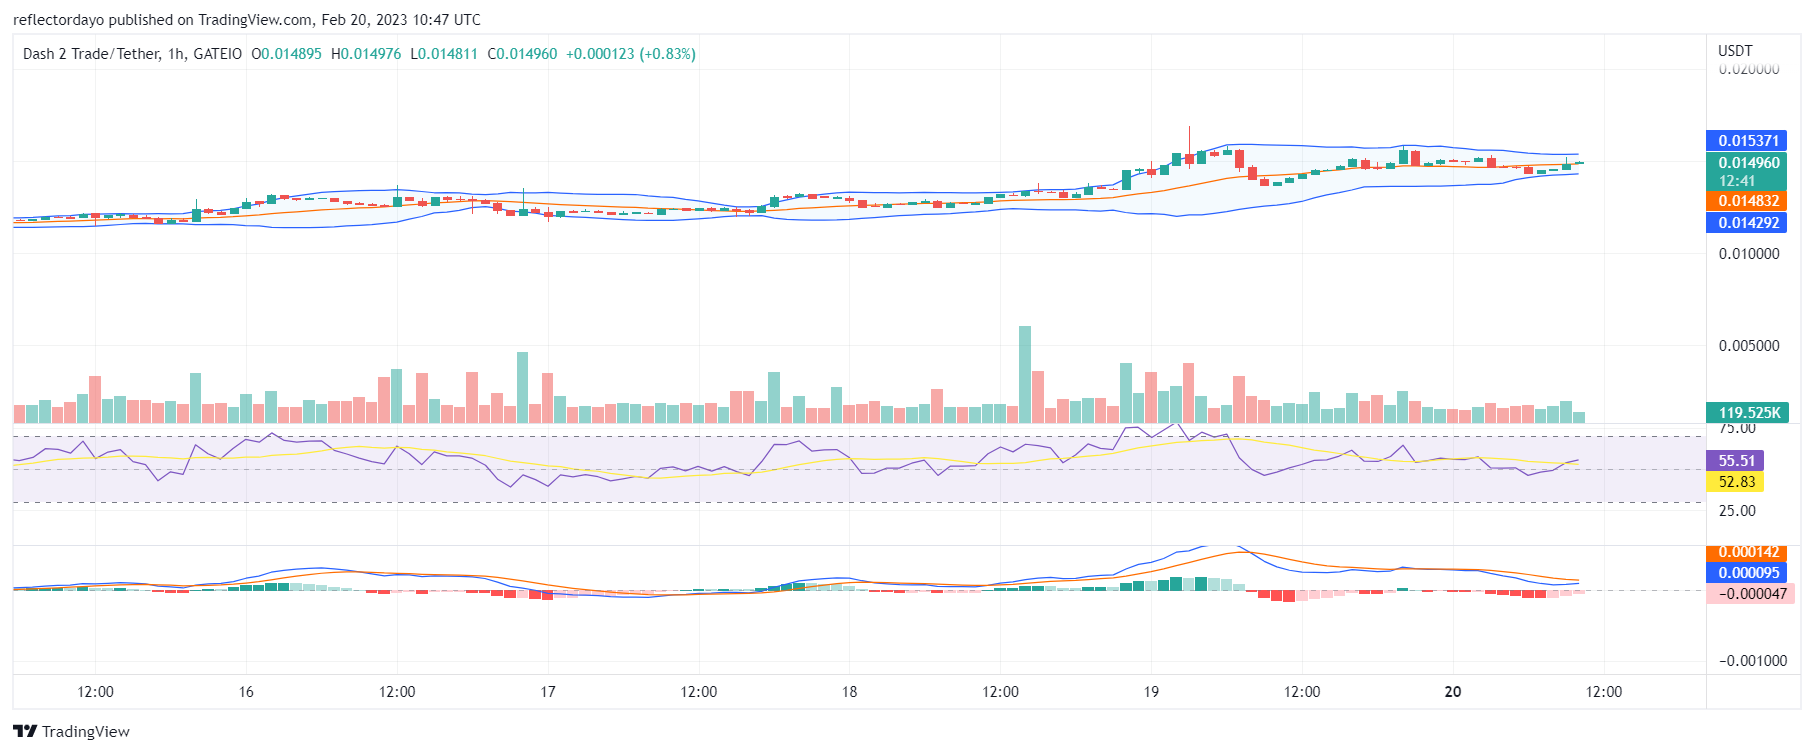 Dash 2 Trade (D2T) Resistance Price Level Finally Succumbs to Pressure